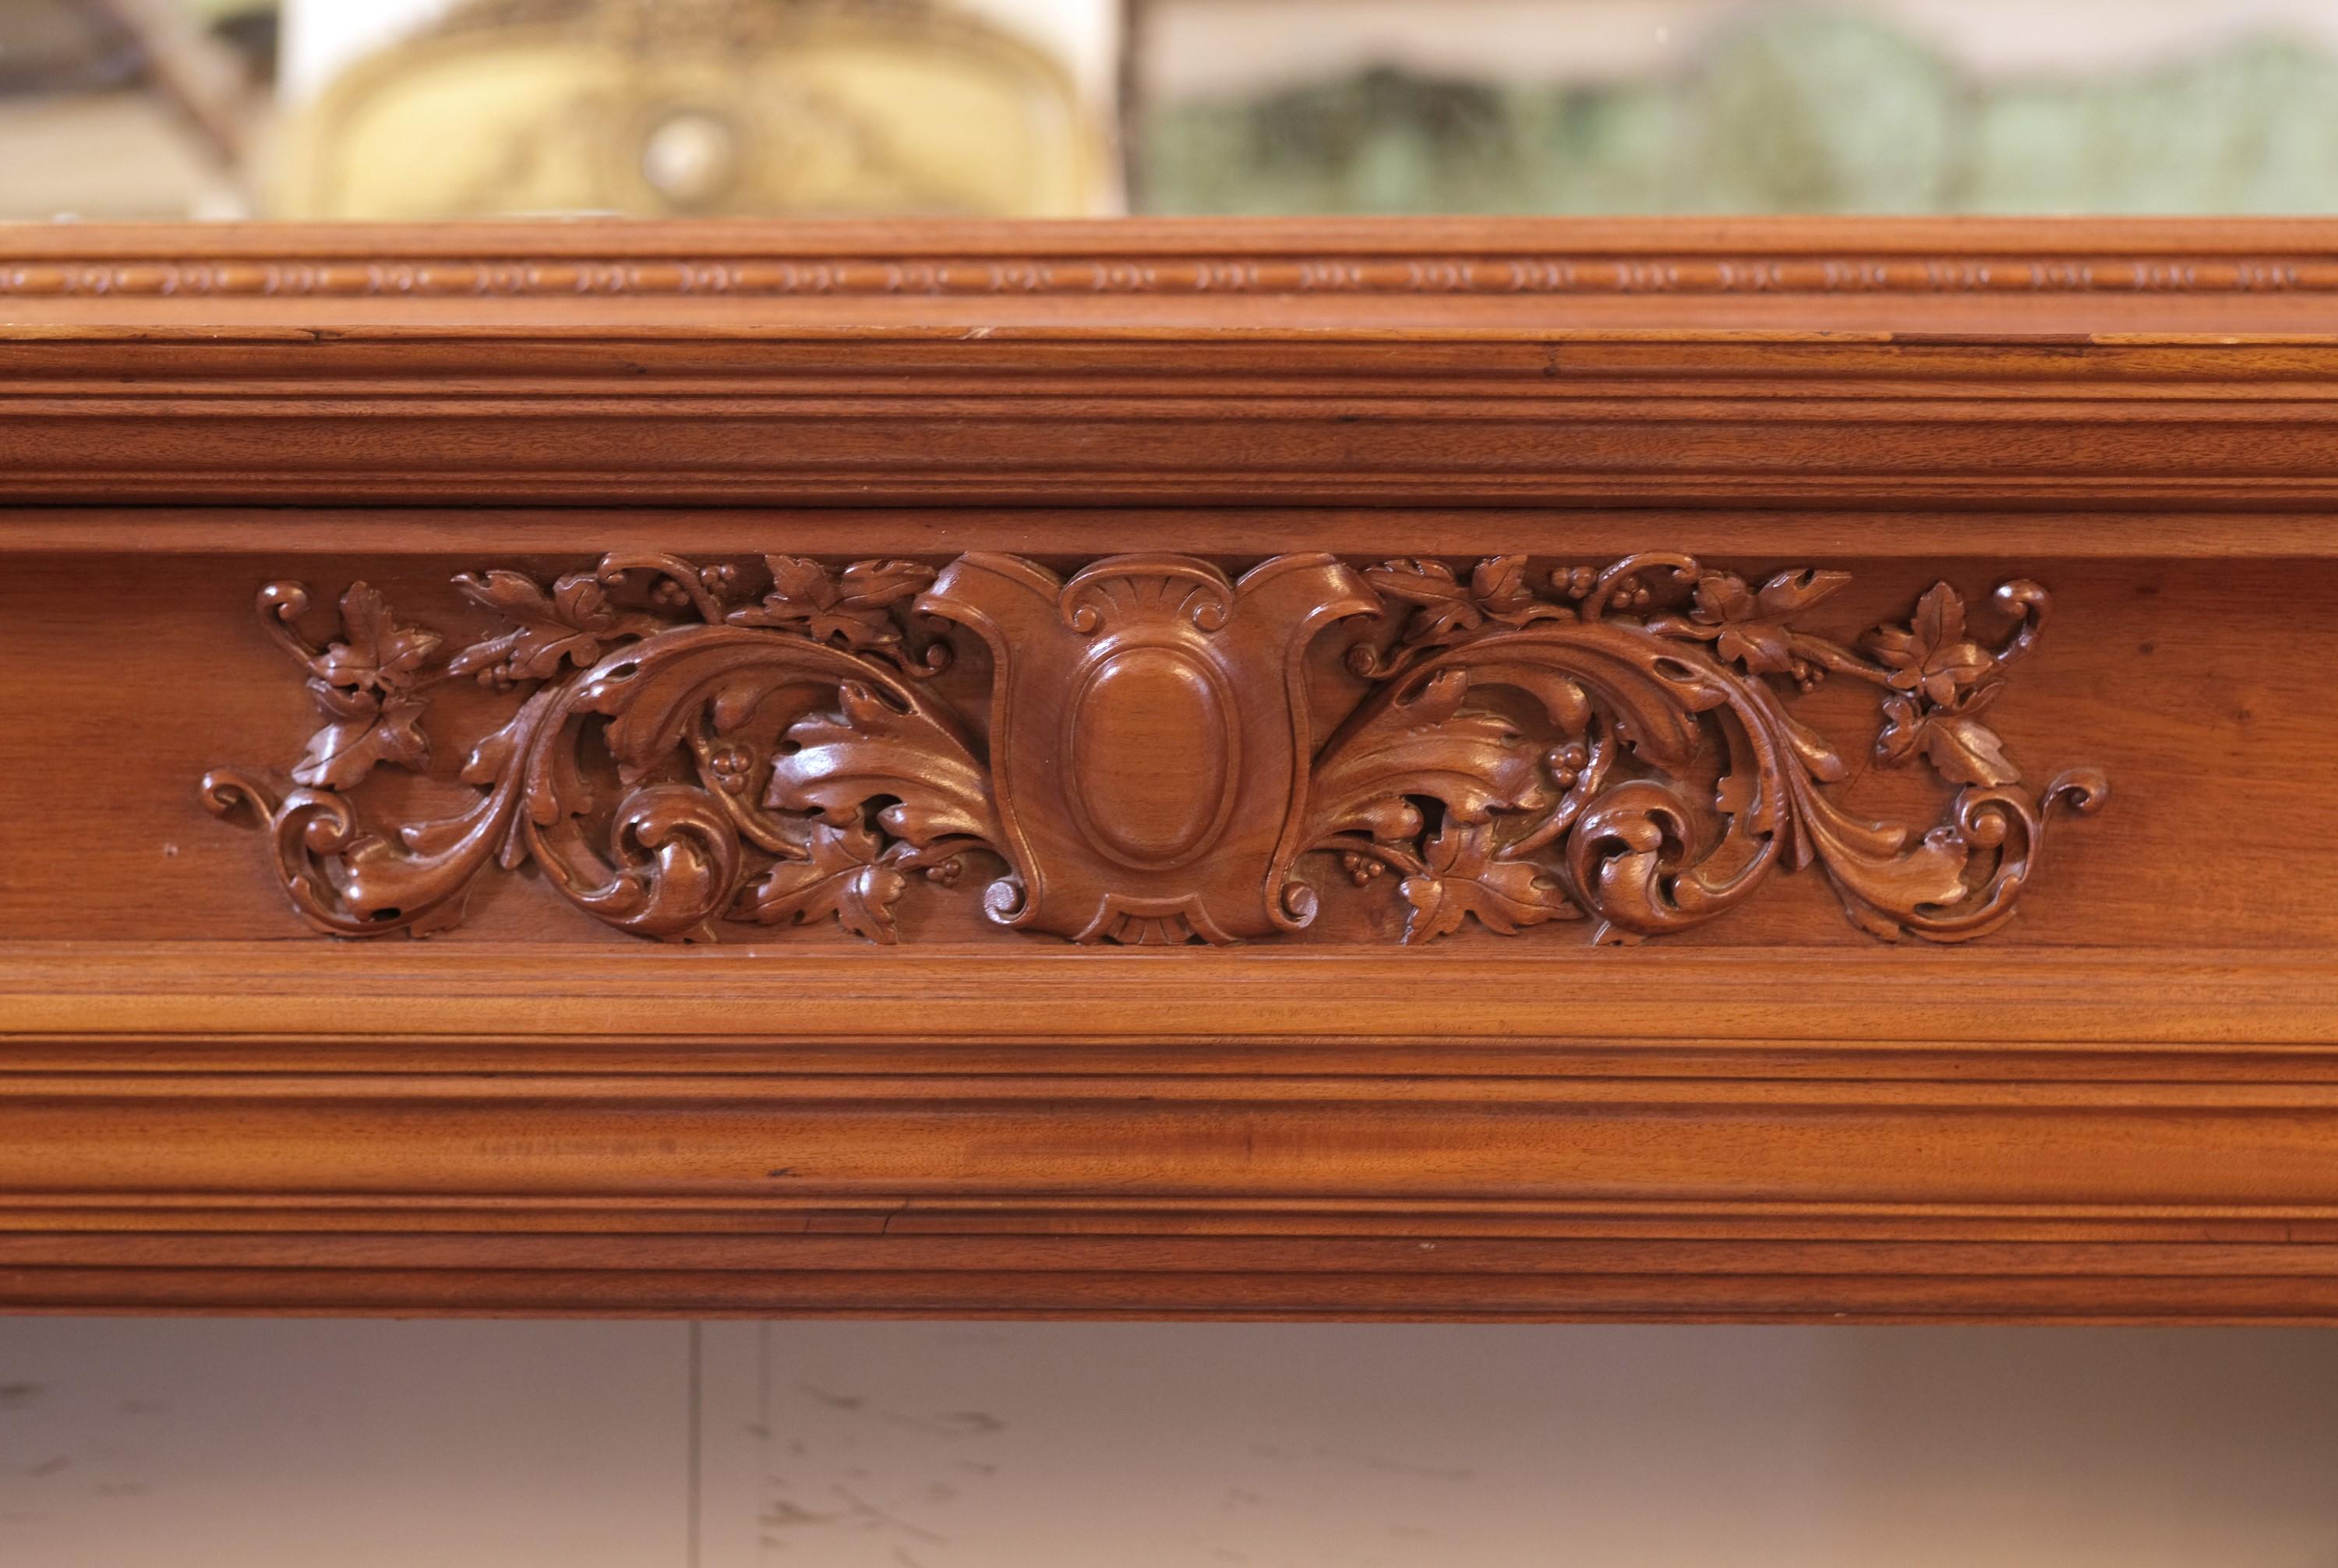 Mirror Hand Carved Mahogany Double Decker Mantel 4 Griffins For Sale